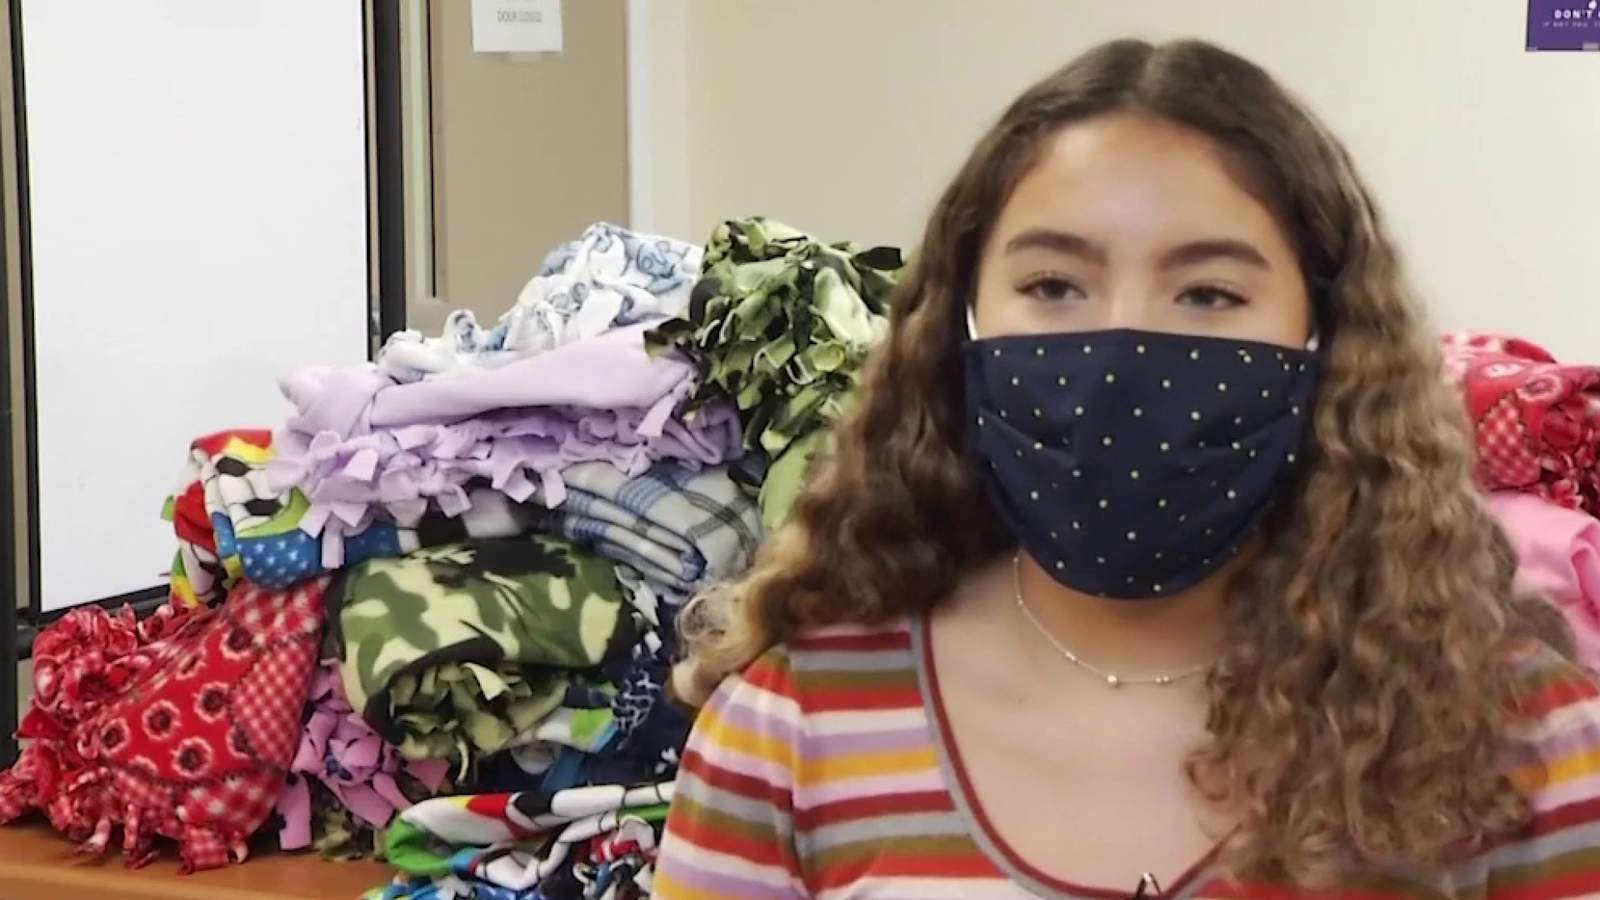 Local 18-year-old donates 150 fleece blankets to children living in shelters